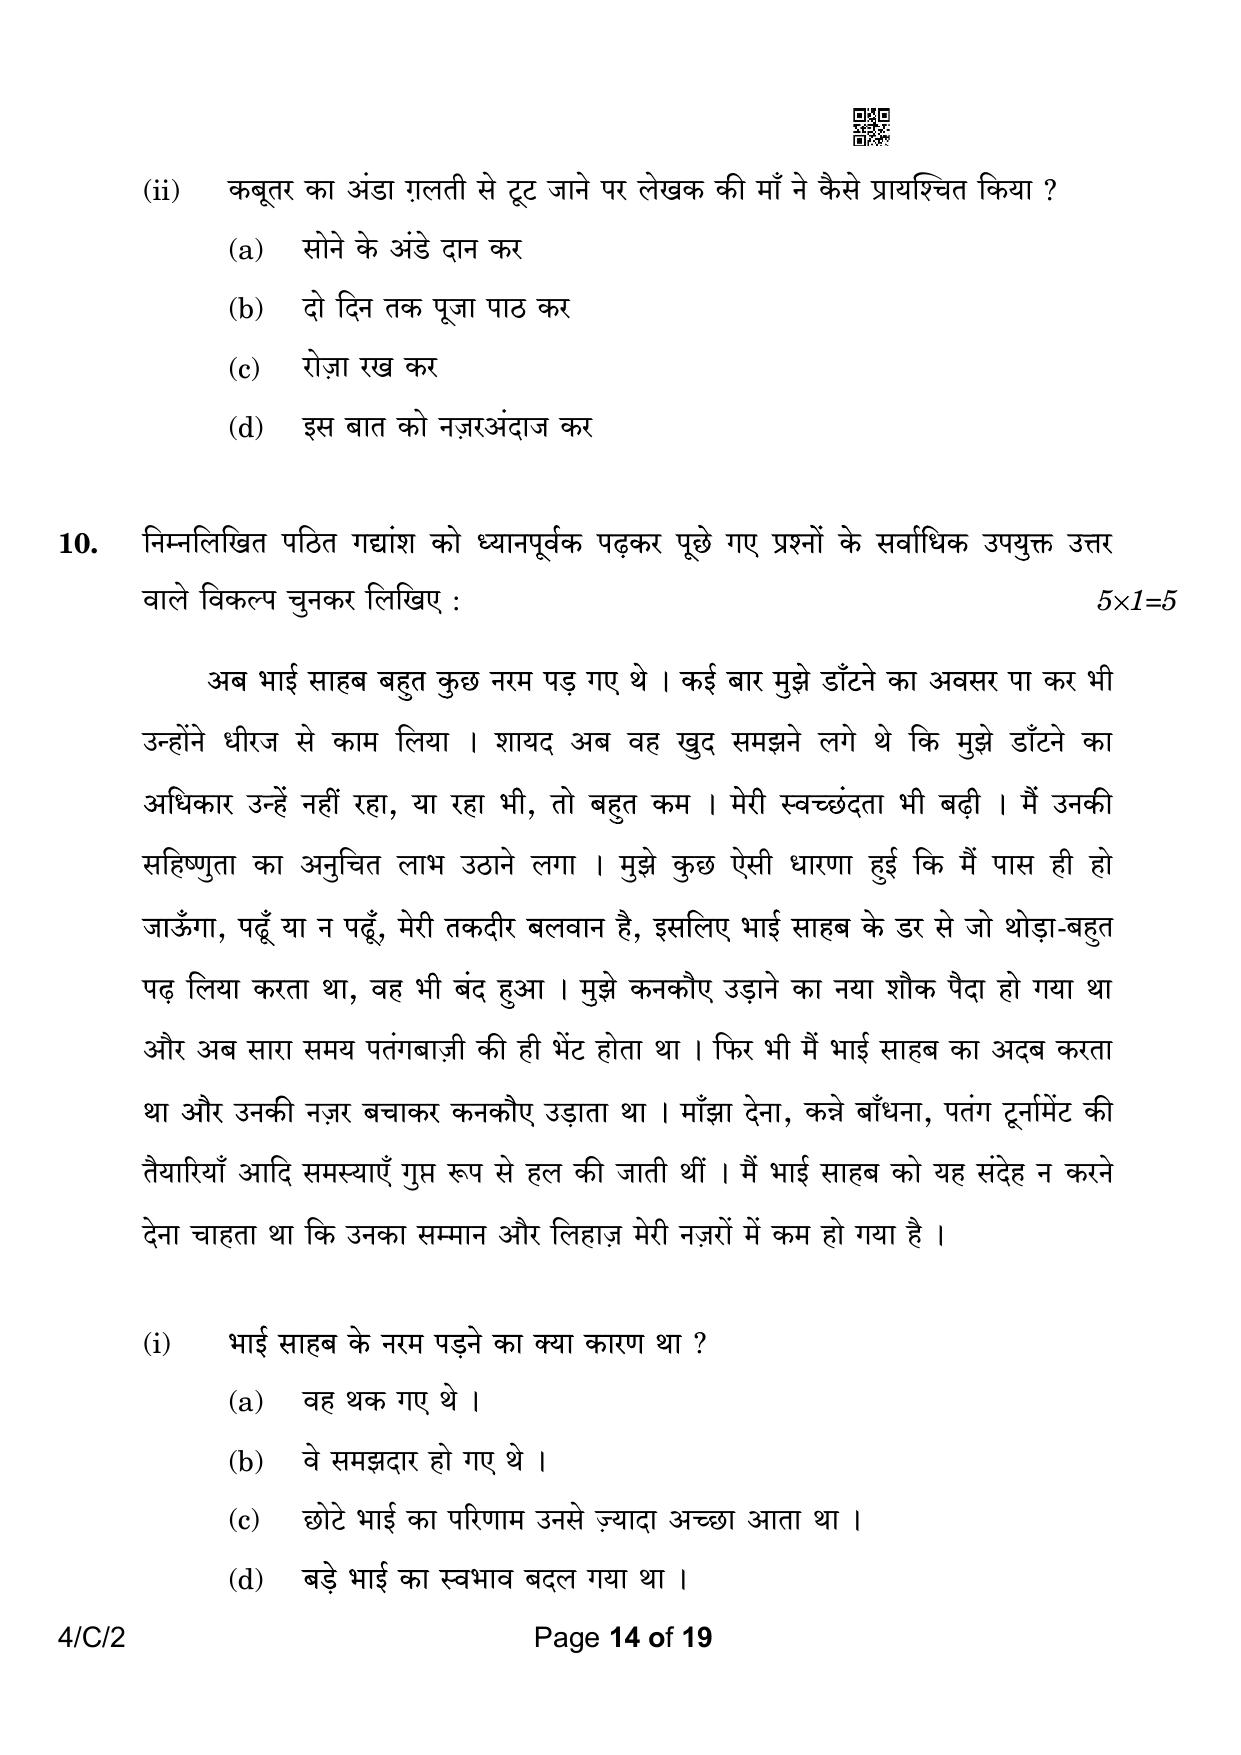 CBSE Class 10 4-2 Hindi B 2023 (Compartment) Question Paper - Page 14